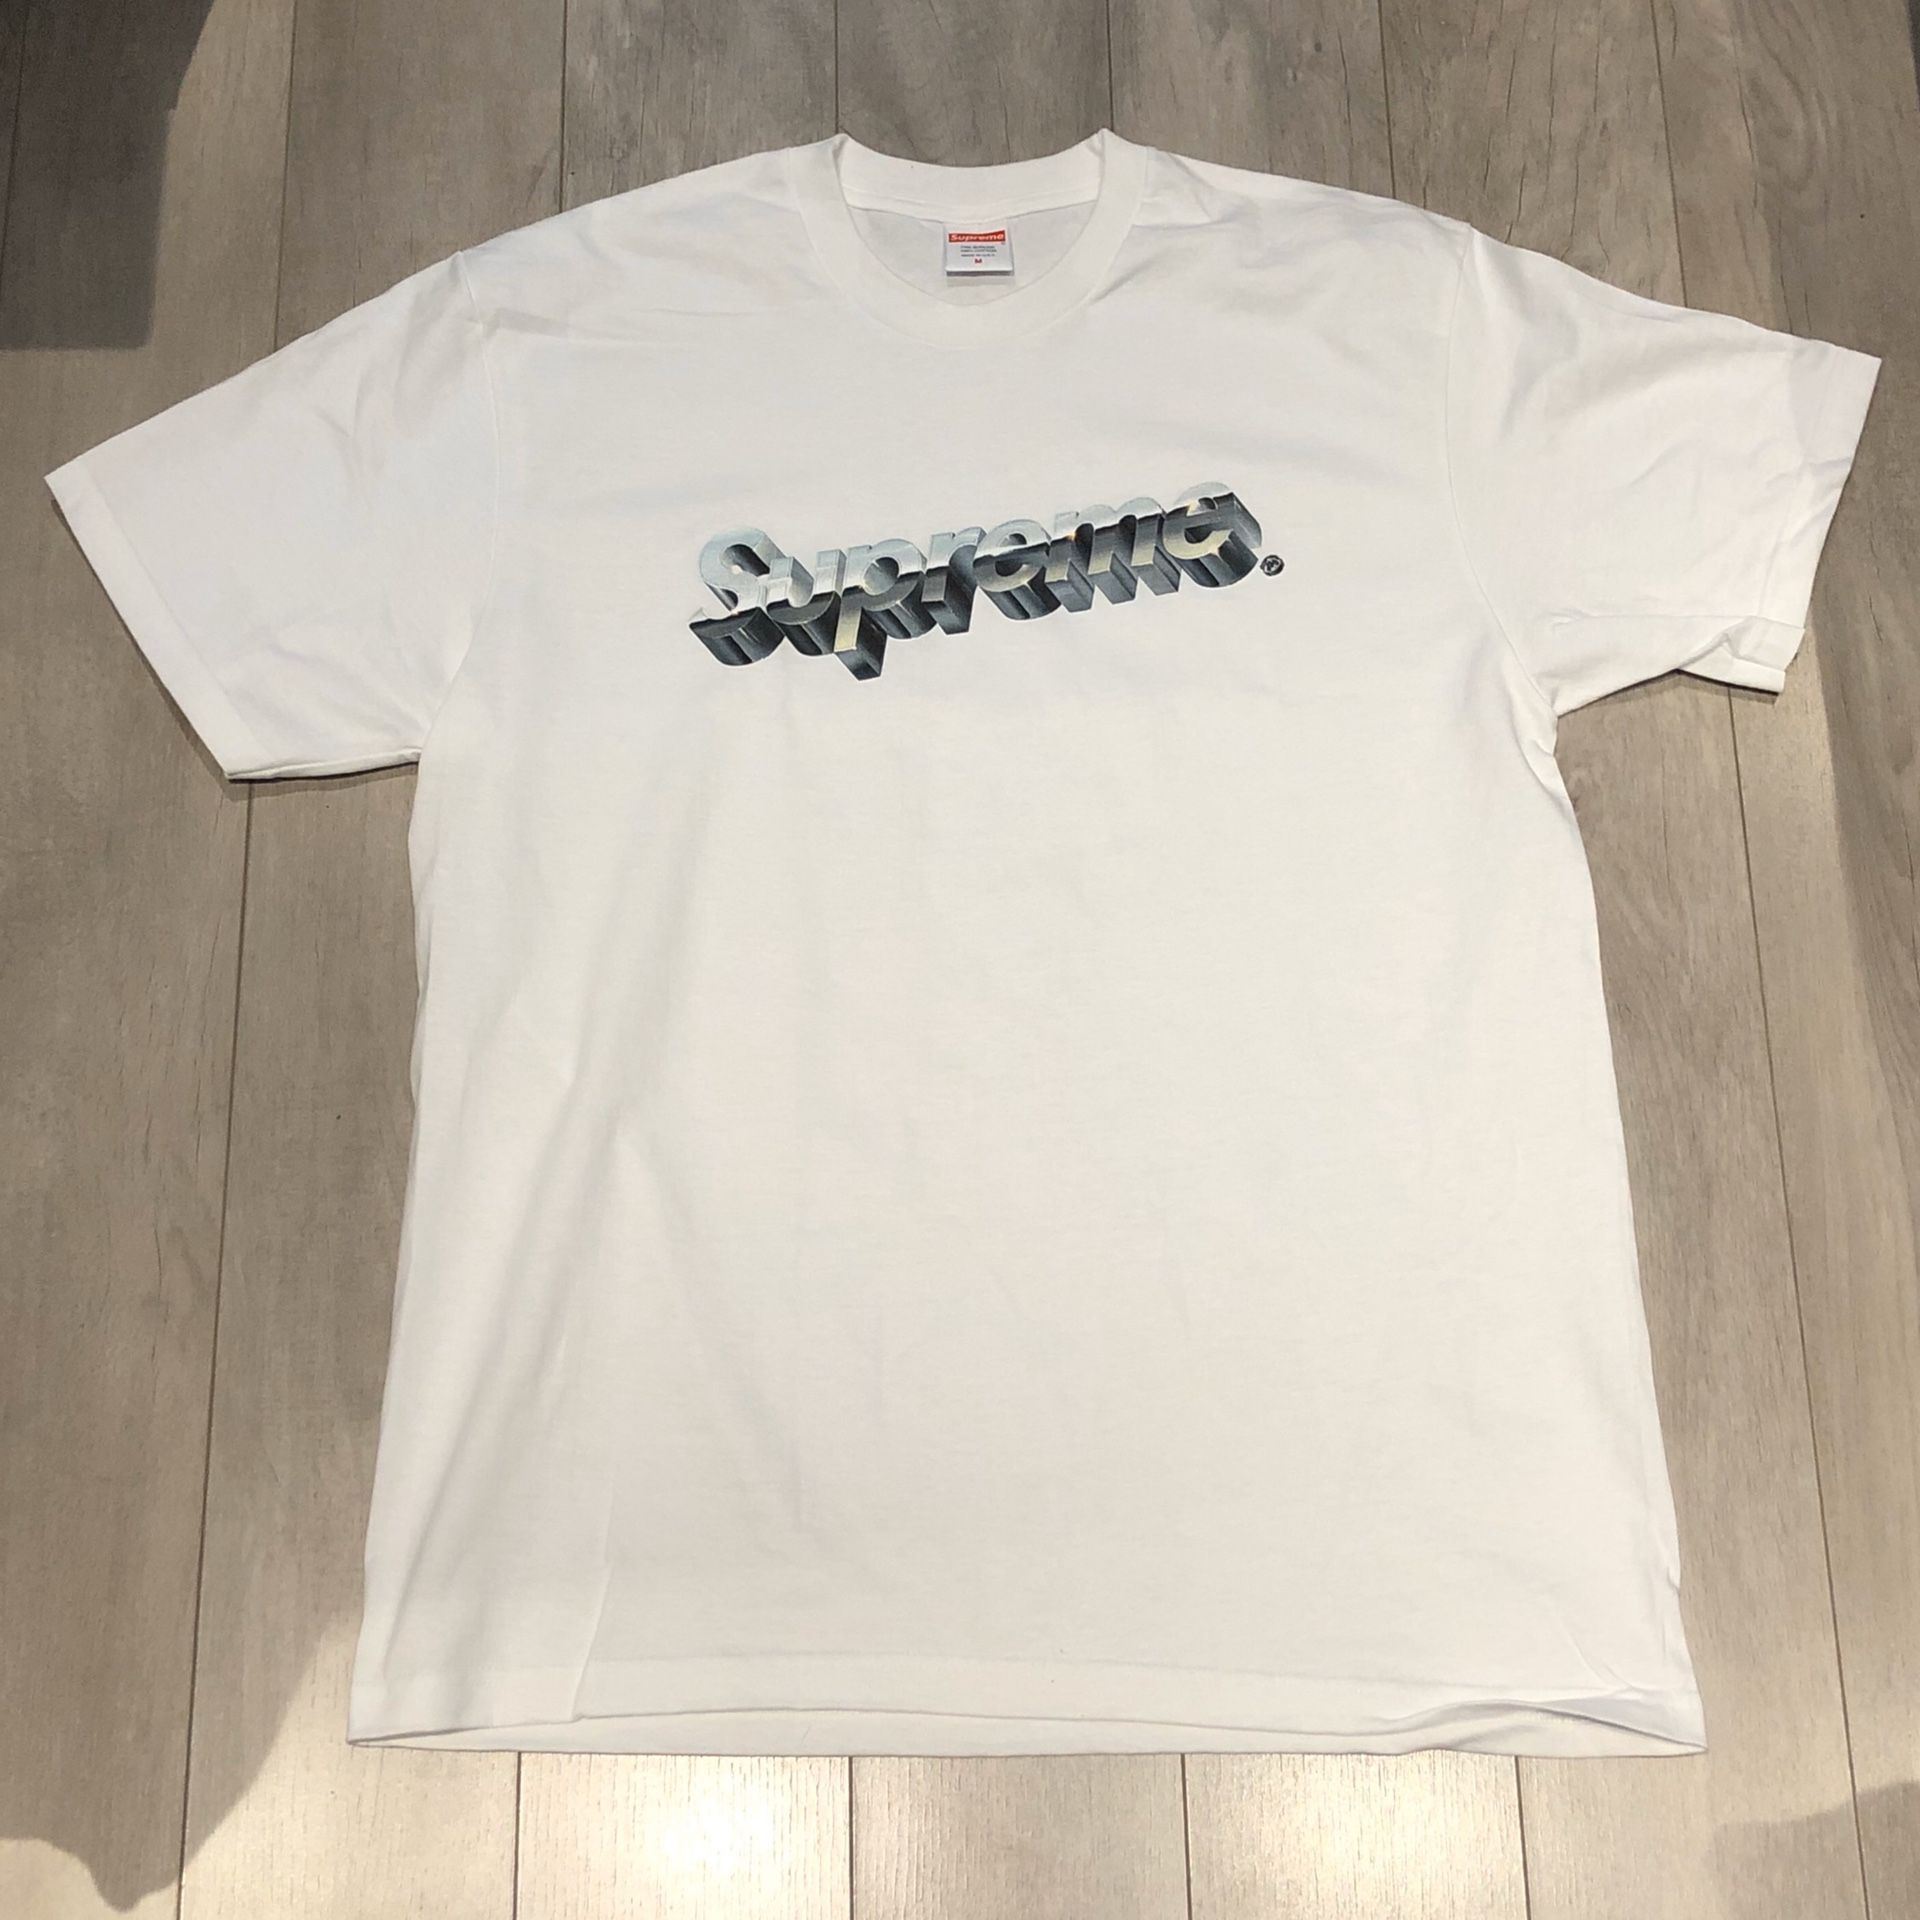 Supreme Morph Tee Medium SS20 100% Authentic In Package